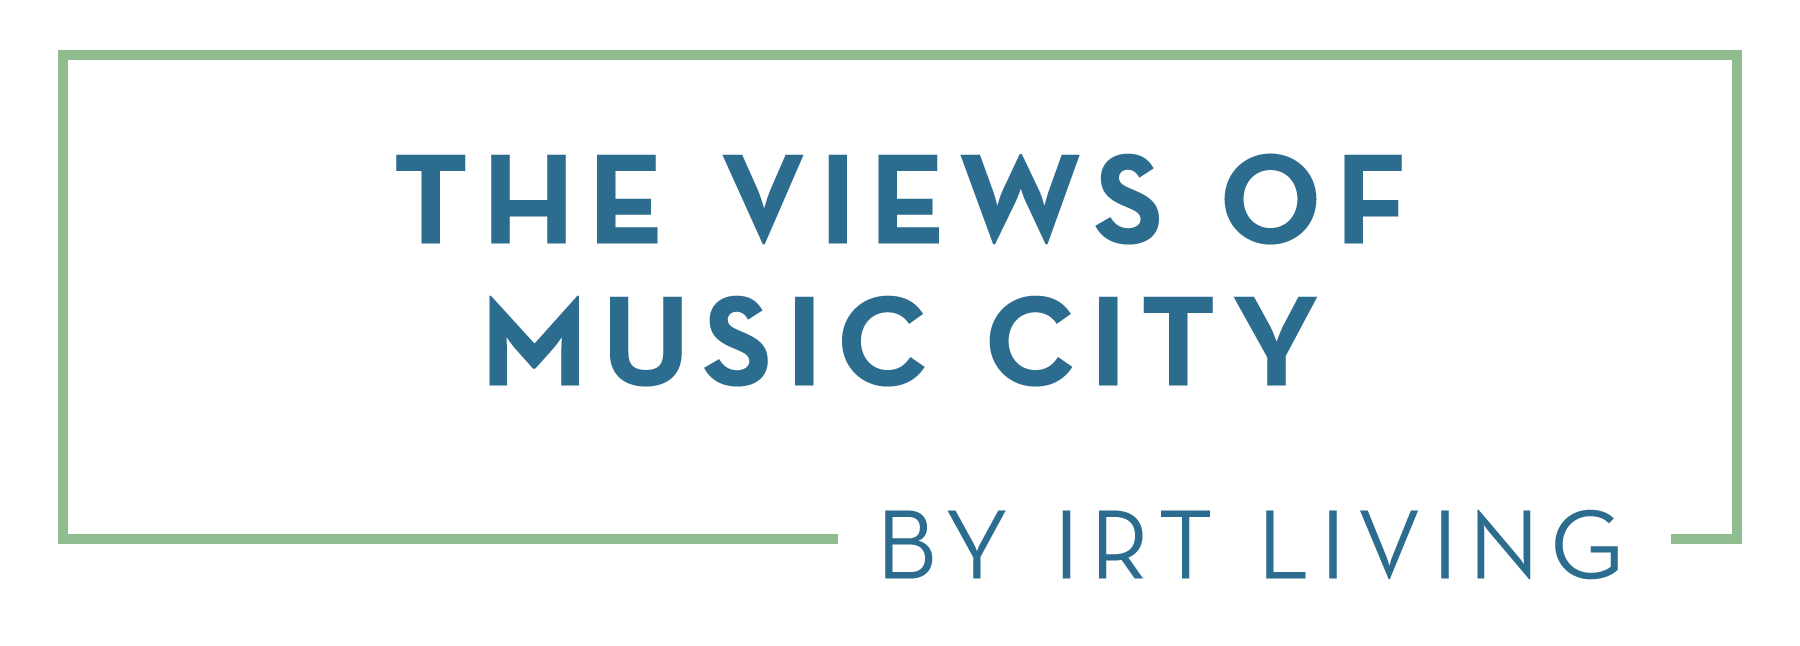 The Views of Music City by IRT Living